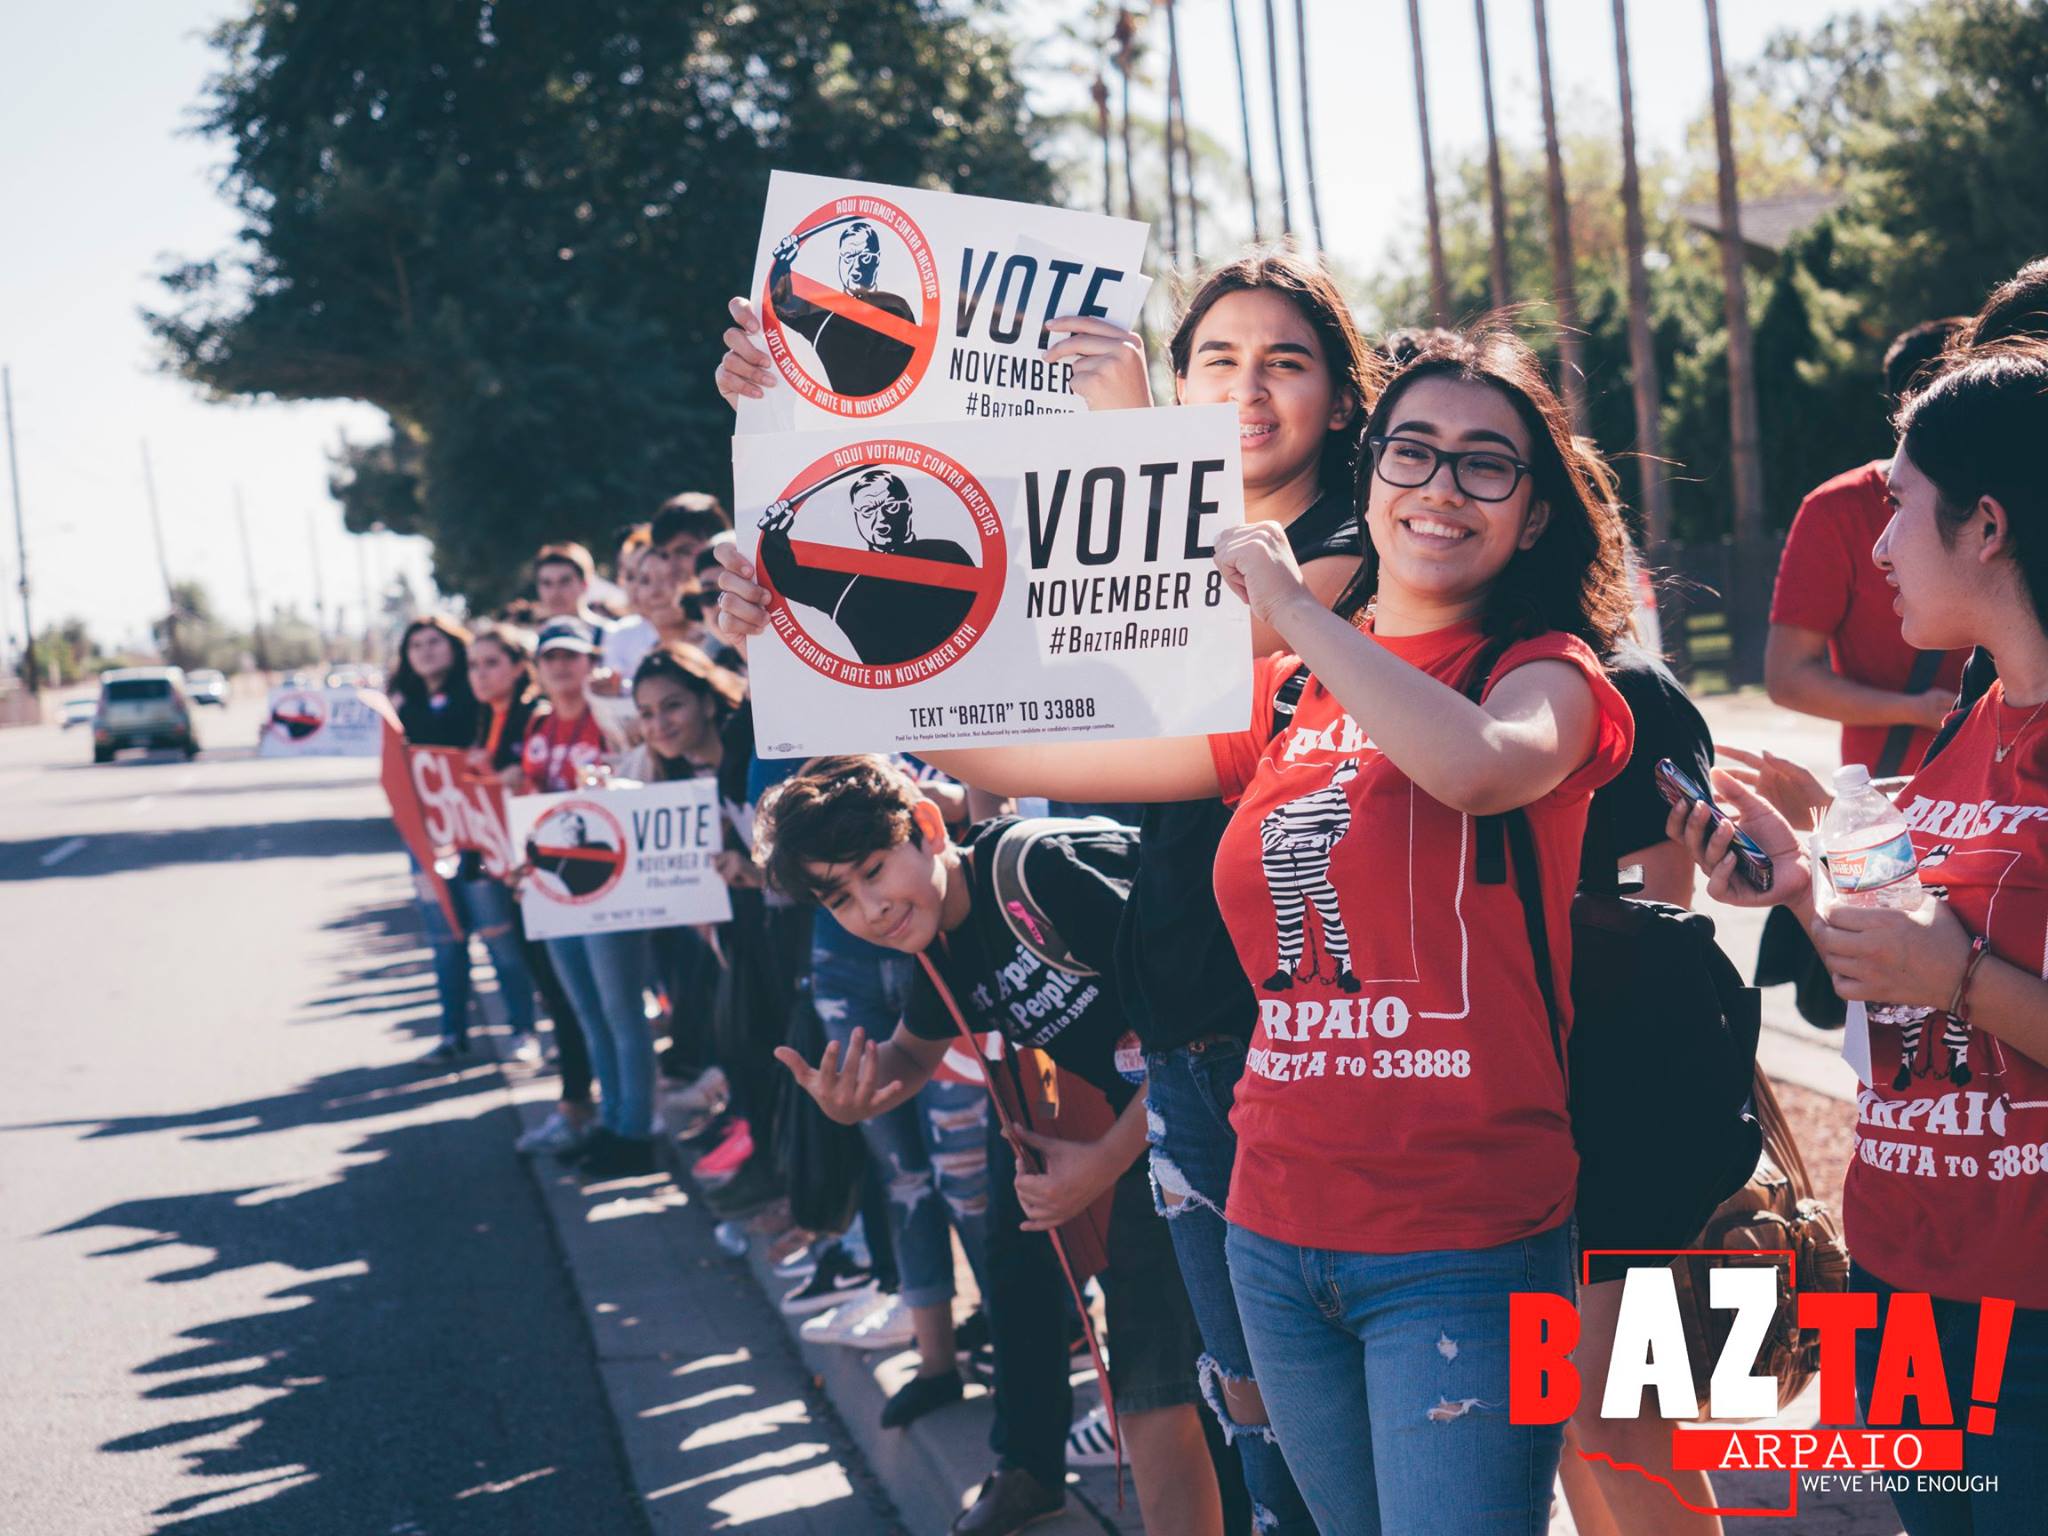 Getting out the vote to stop Joe Arpaio